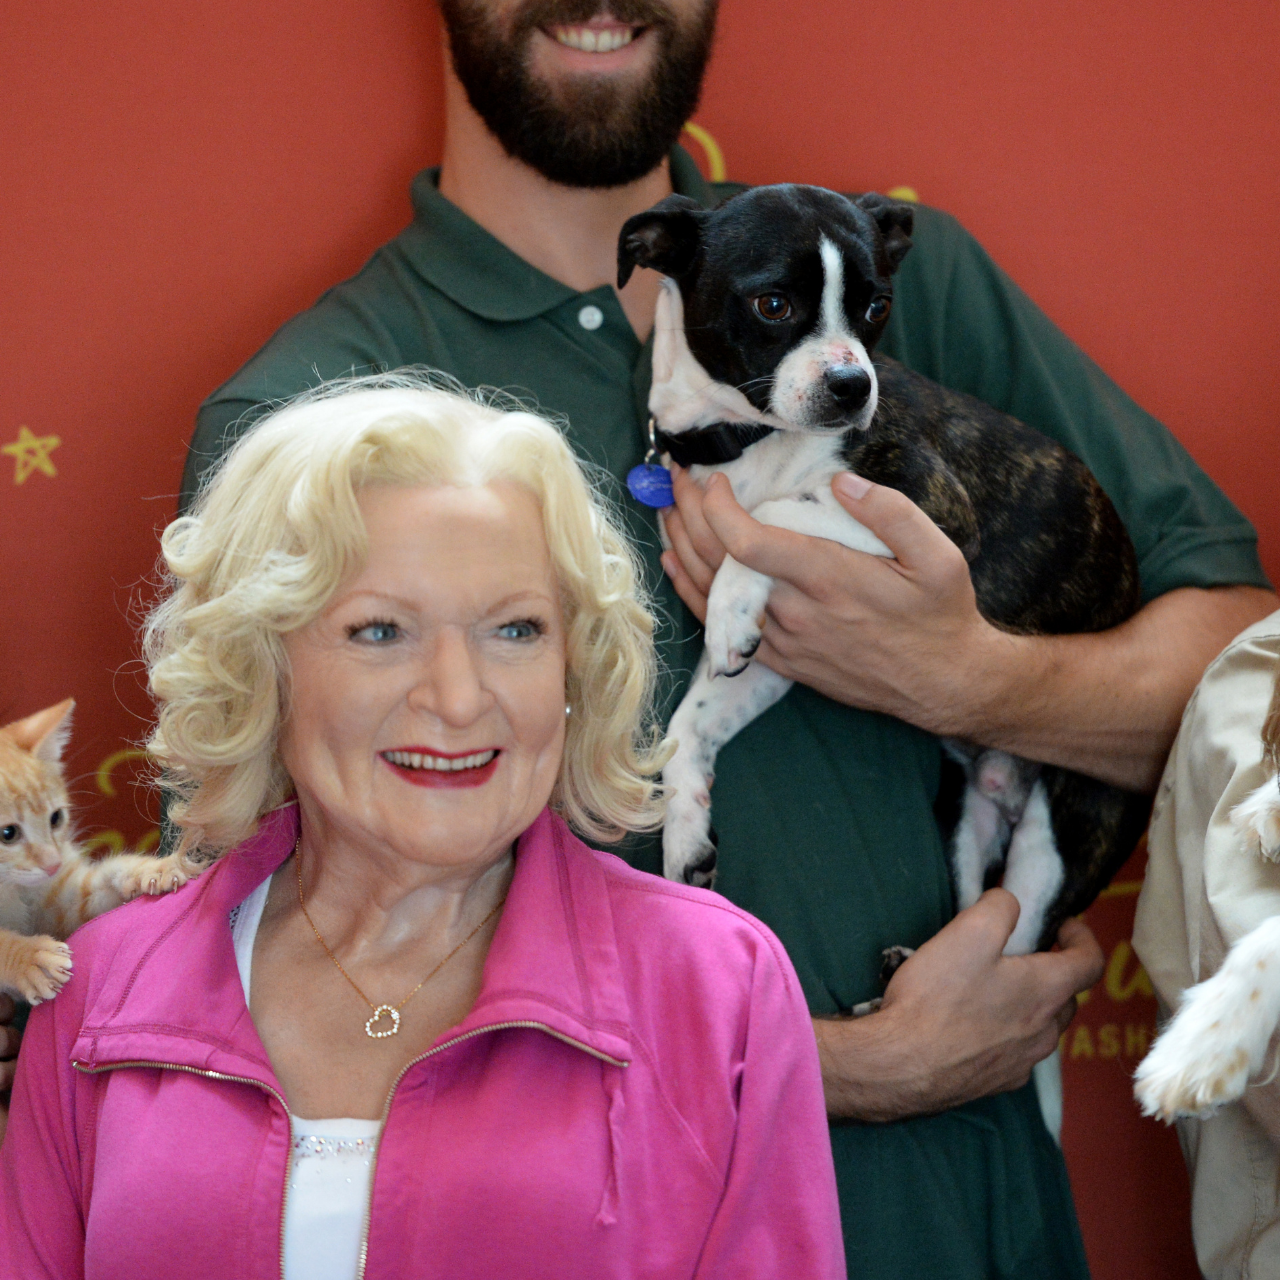 Betty White's wax figure of Madame Tussauds with multiple adoptable dogs, cats, puppies and kittens